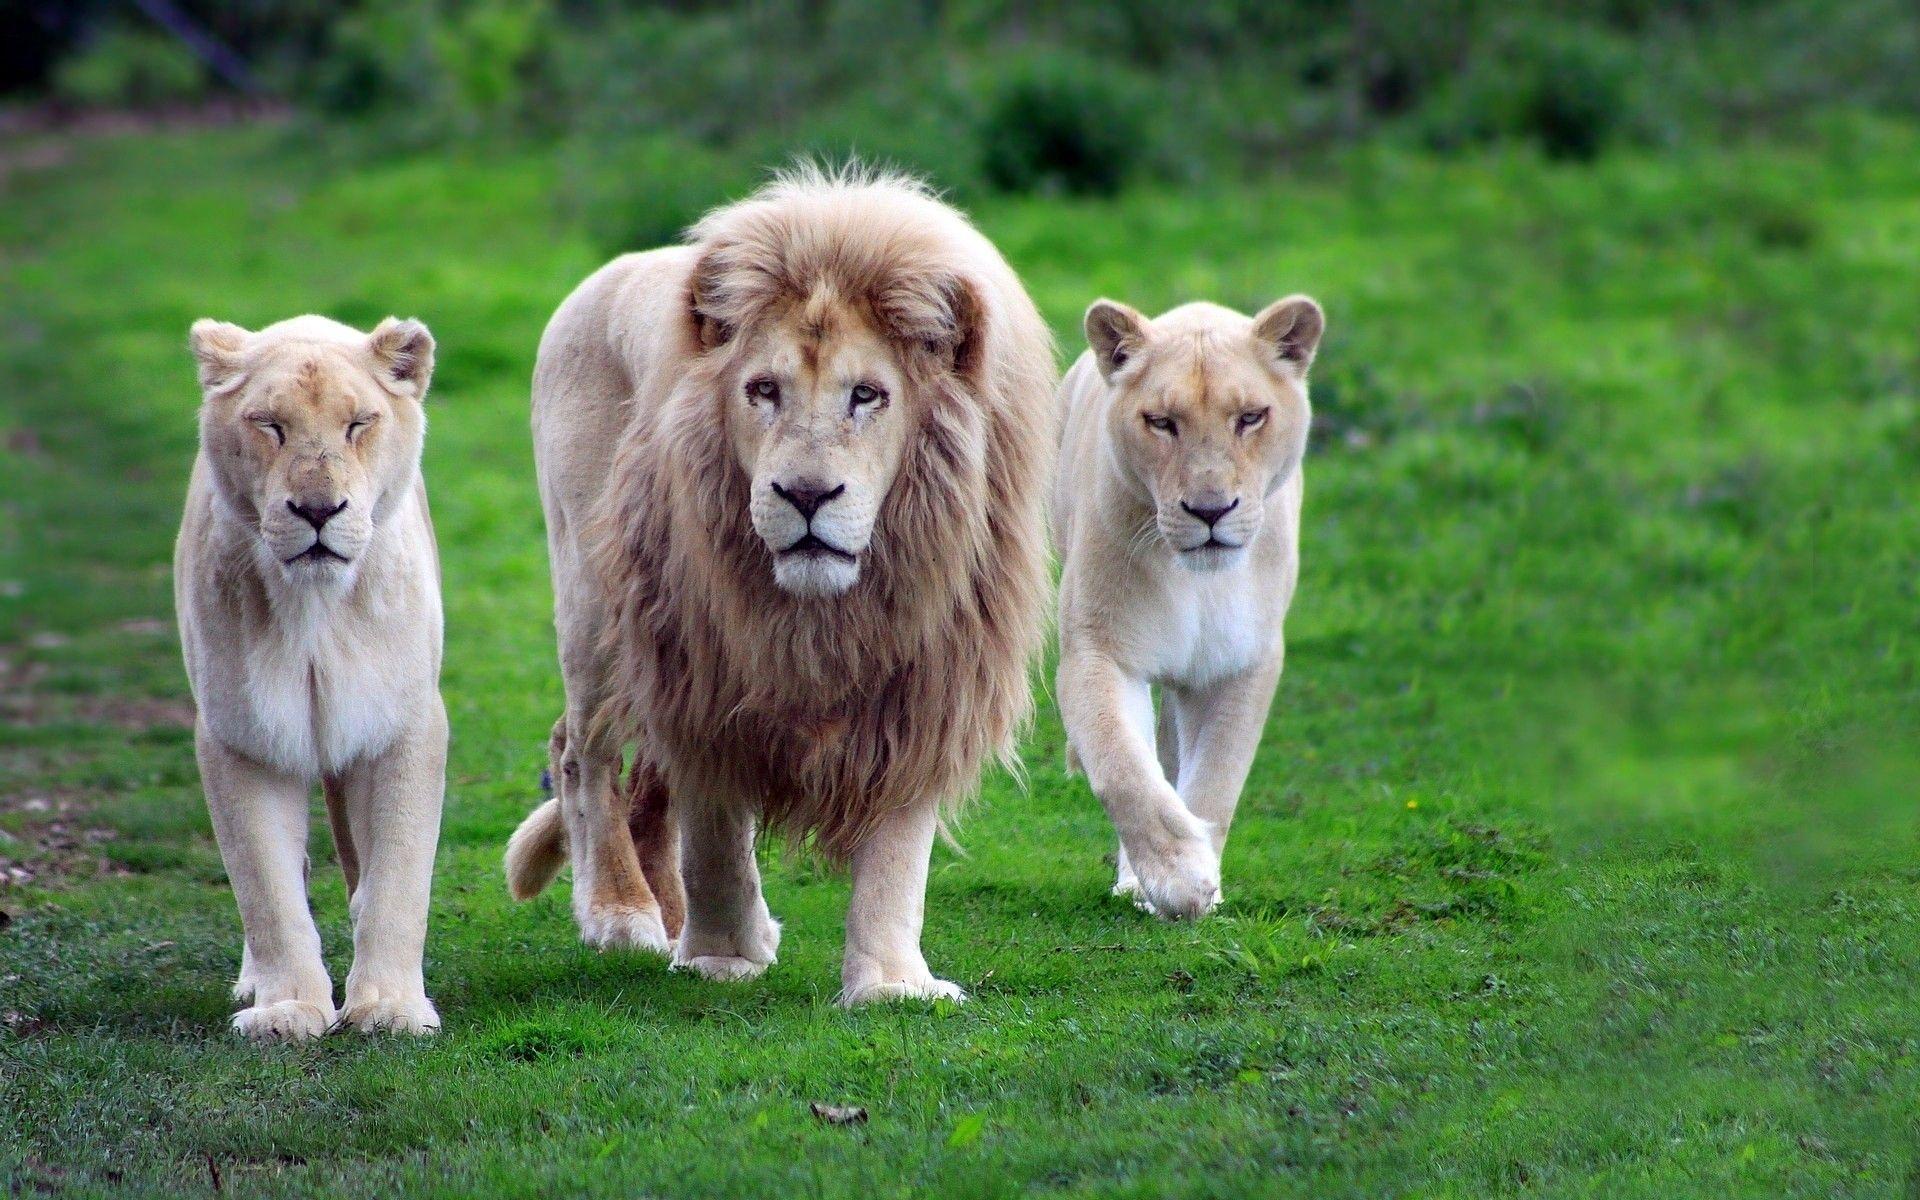 Nature animals lions wildcat white lions africa wallpaper